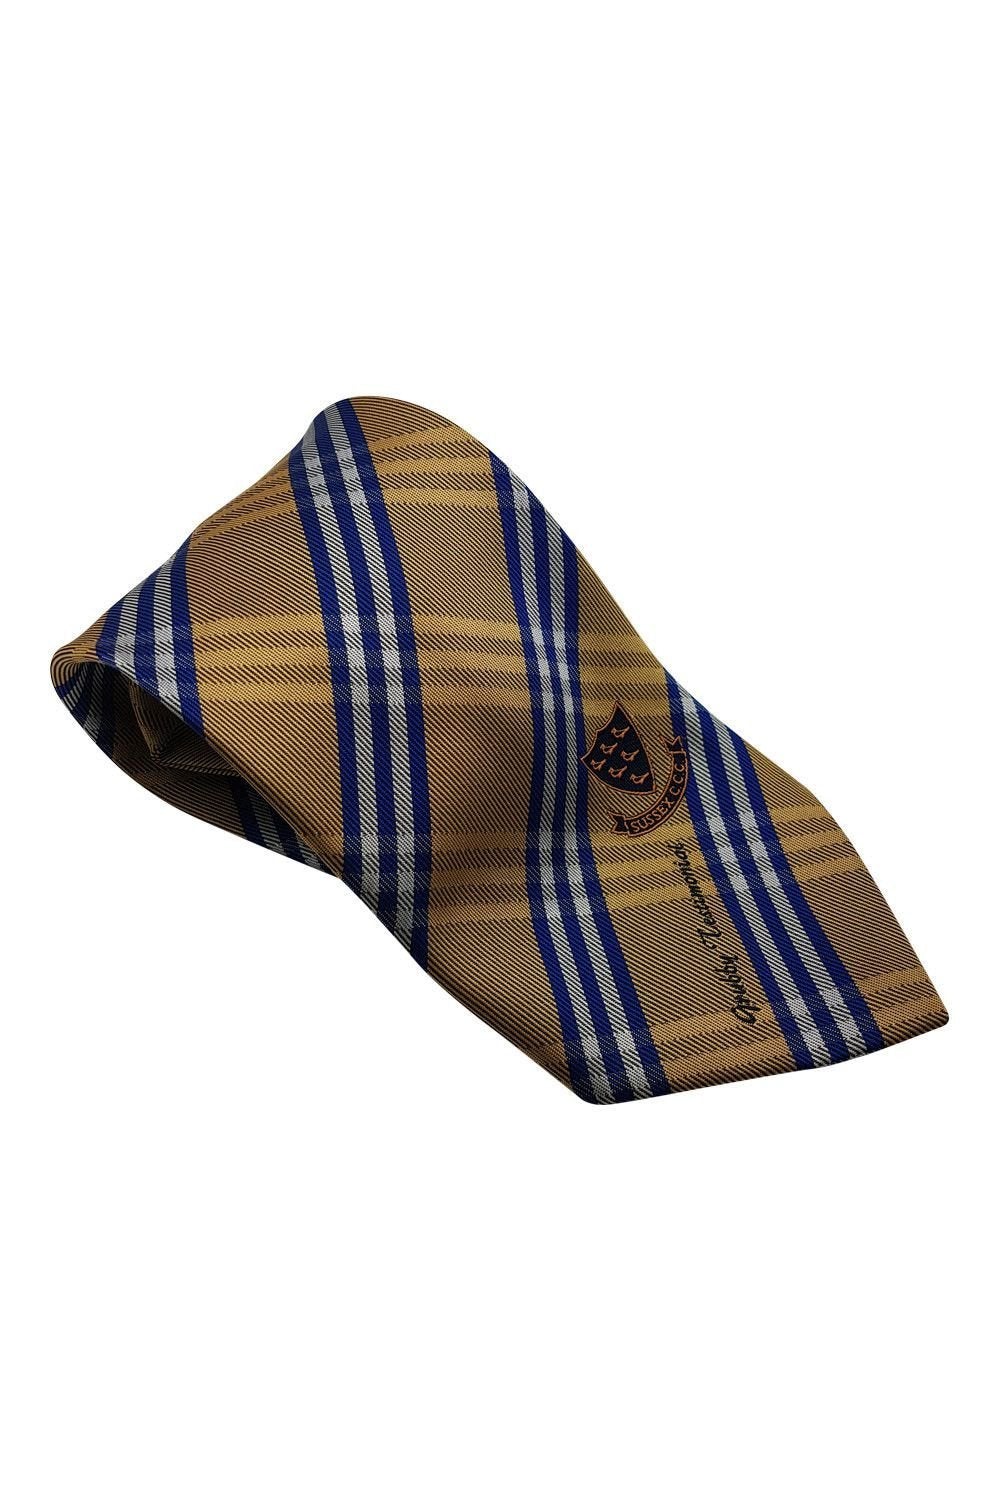 ALLEZ Sussex County Cricket Club Gold Checked Tie (59")-Allez-The Freperie